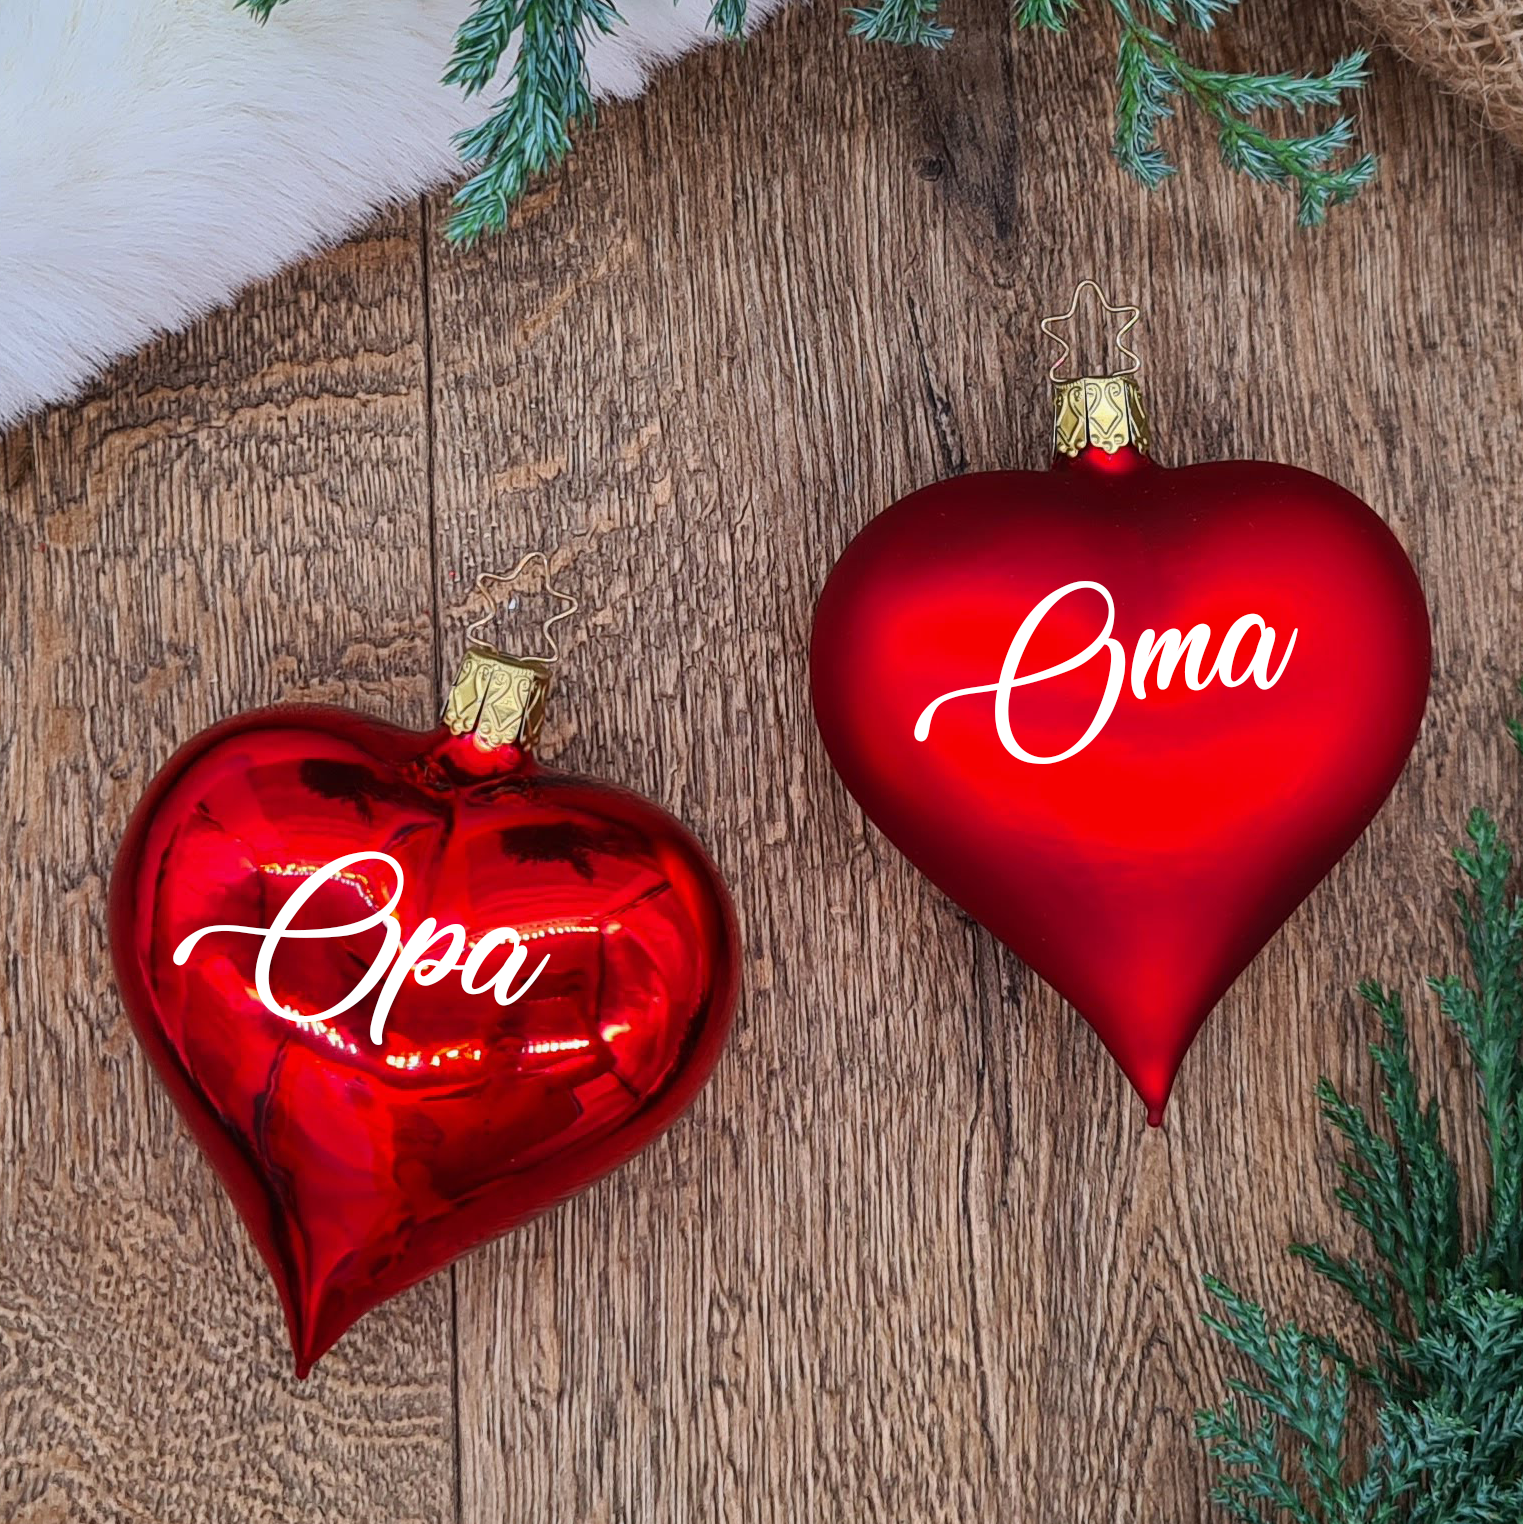 Set of 2 red heart-shaped glass Ornaments with white text